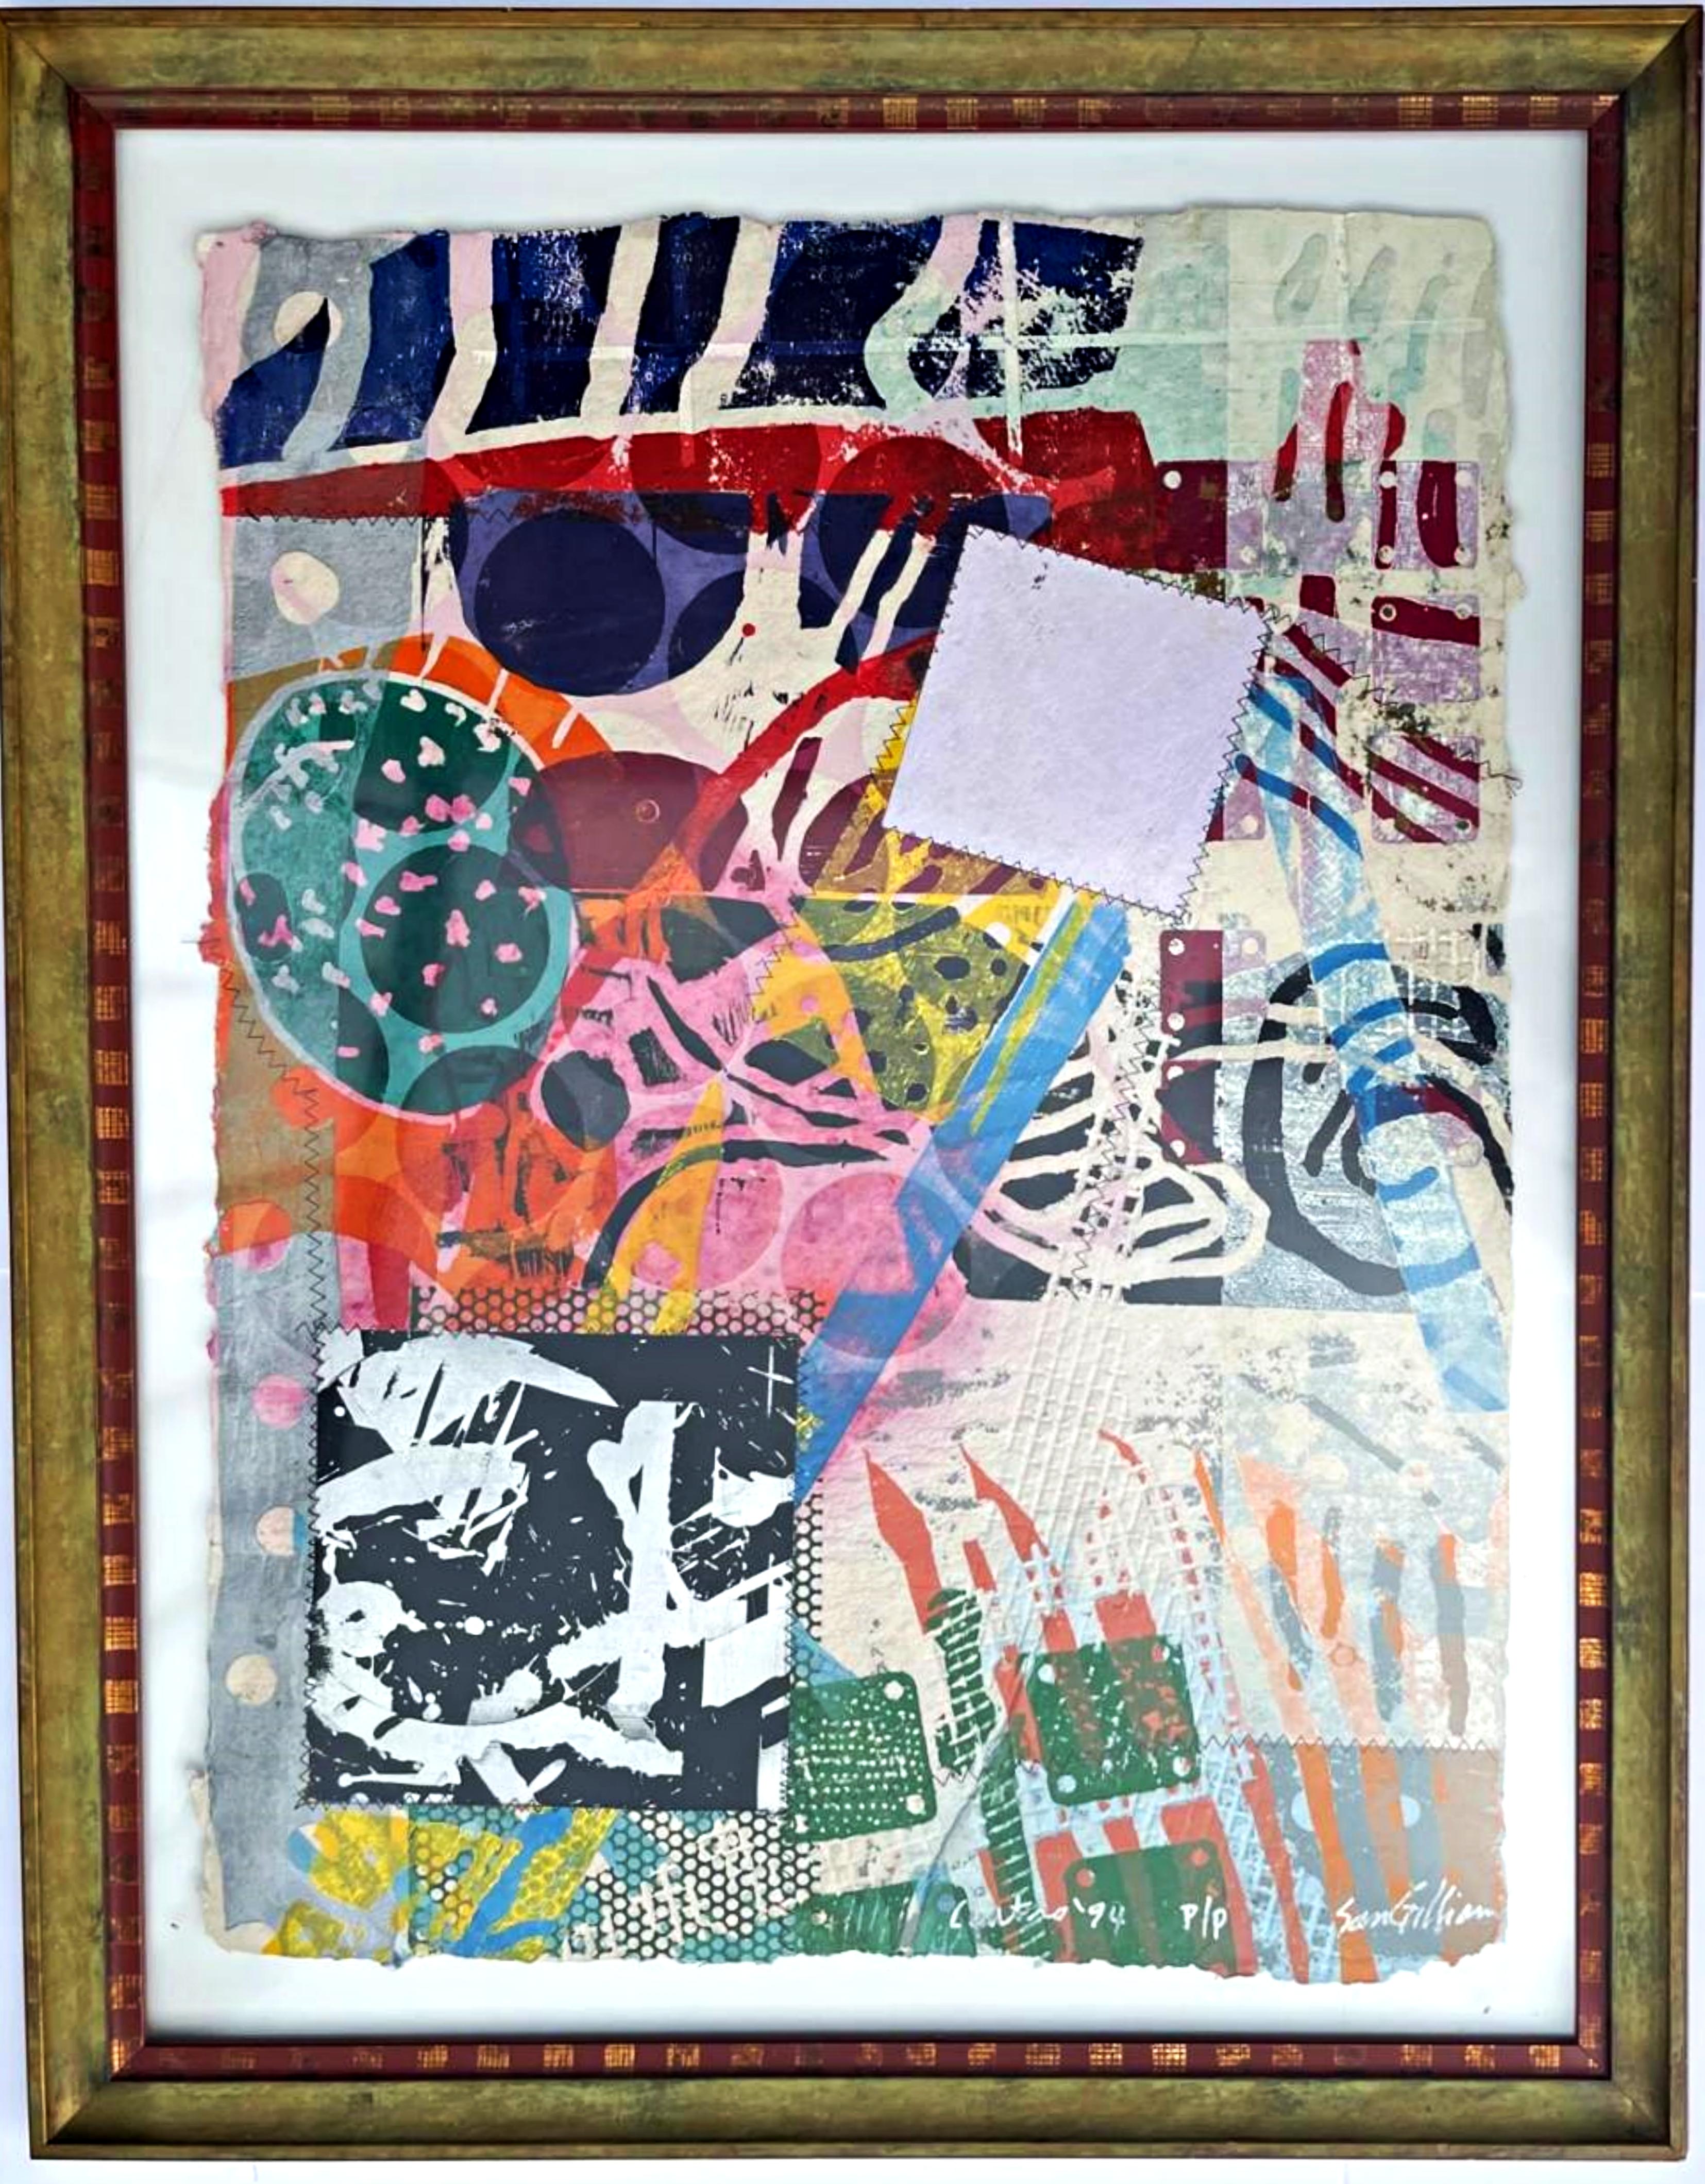 Cuatro (Monoprint with screenprint, collage, acrylic, stitching and embossing)